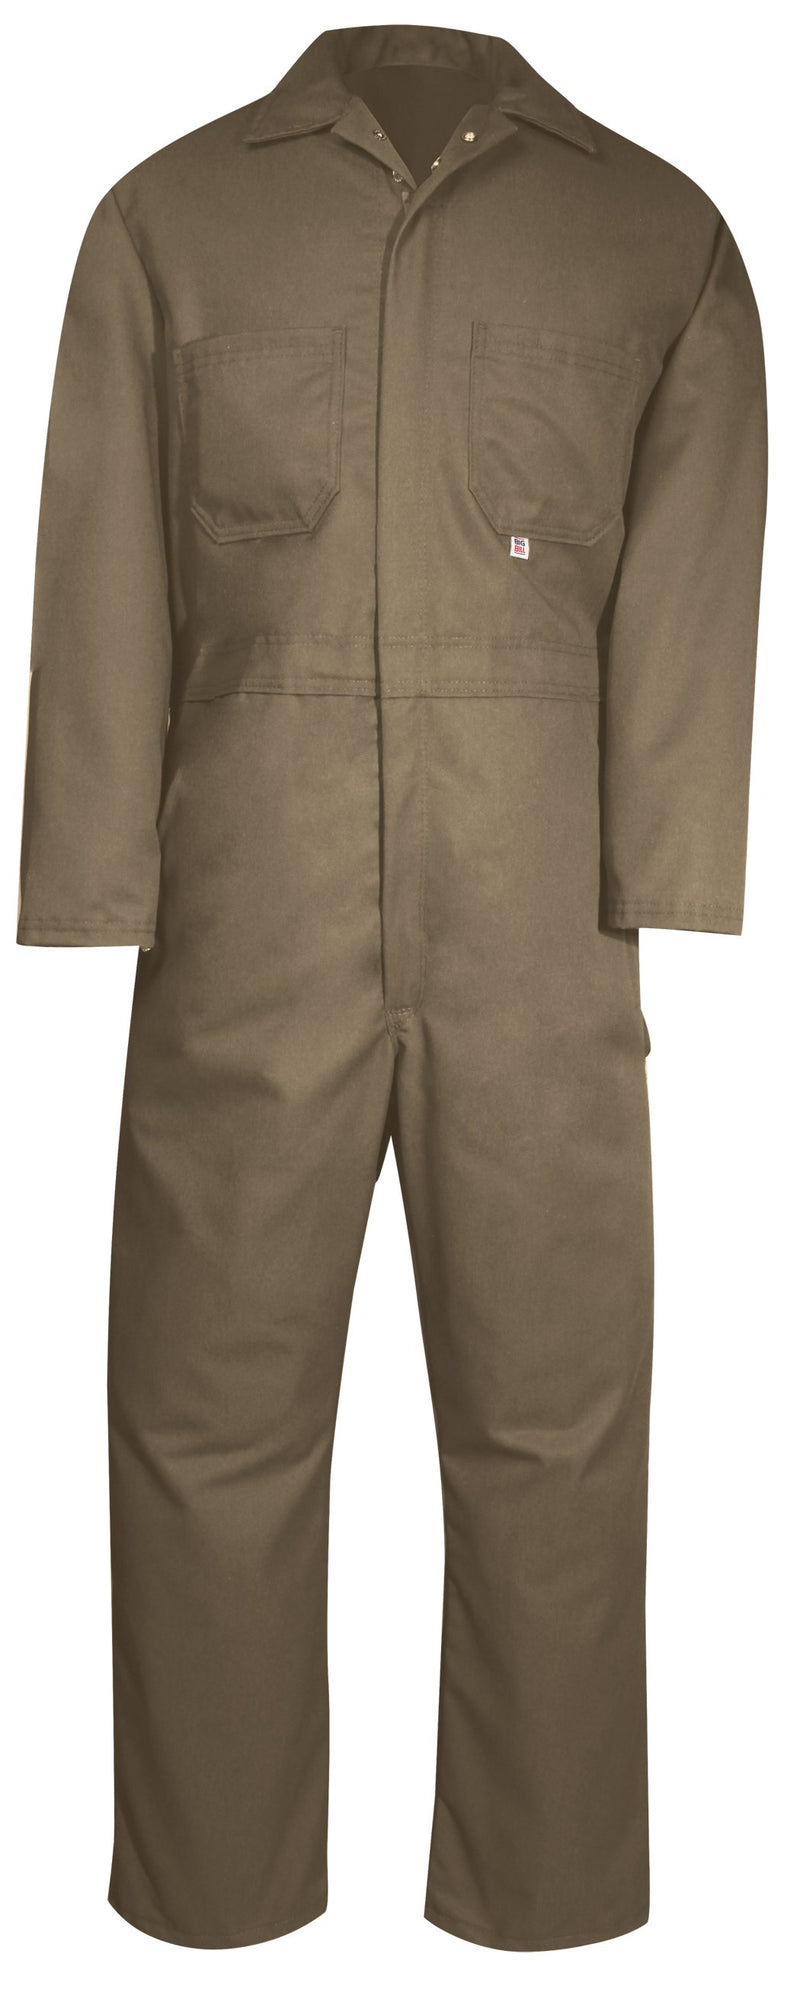 Big Bill 410 Unlined Coverall